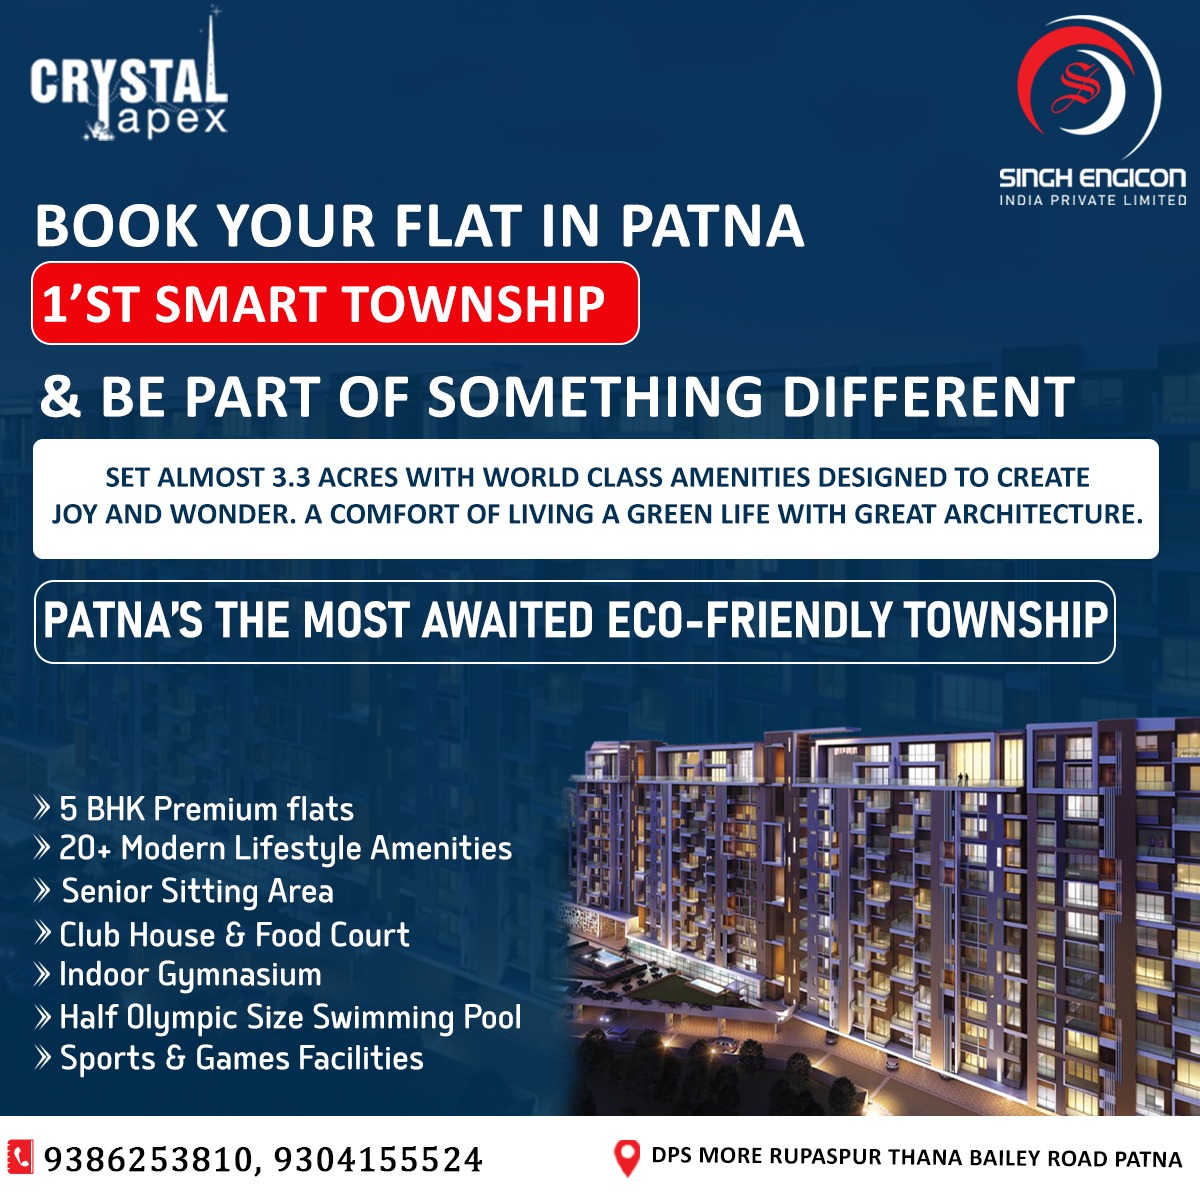 Don't miss out on the opportunity to live in Patna's most talked-about eco-friendly township! 

Call Us:- 9386253810, 9304155524
singhengicon.com

#crystalapex #NewBeginnings #thoughtfulamenities #Apartments #property #home #singhengicon  #Patna #Bihar